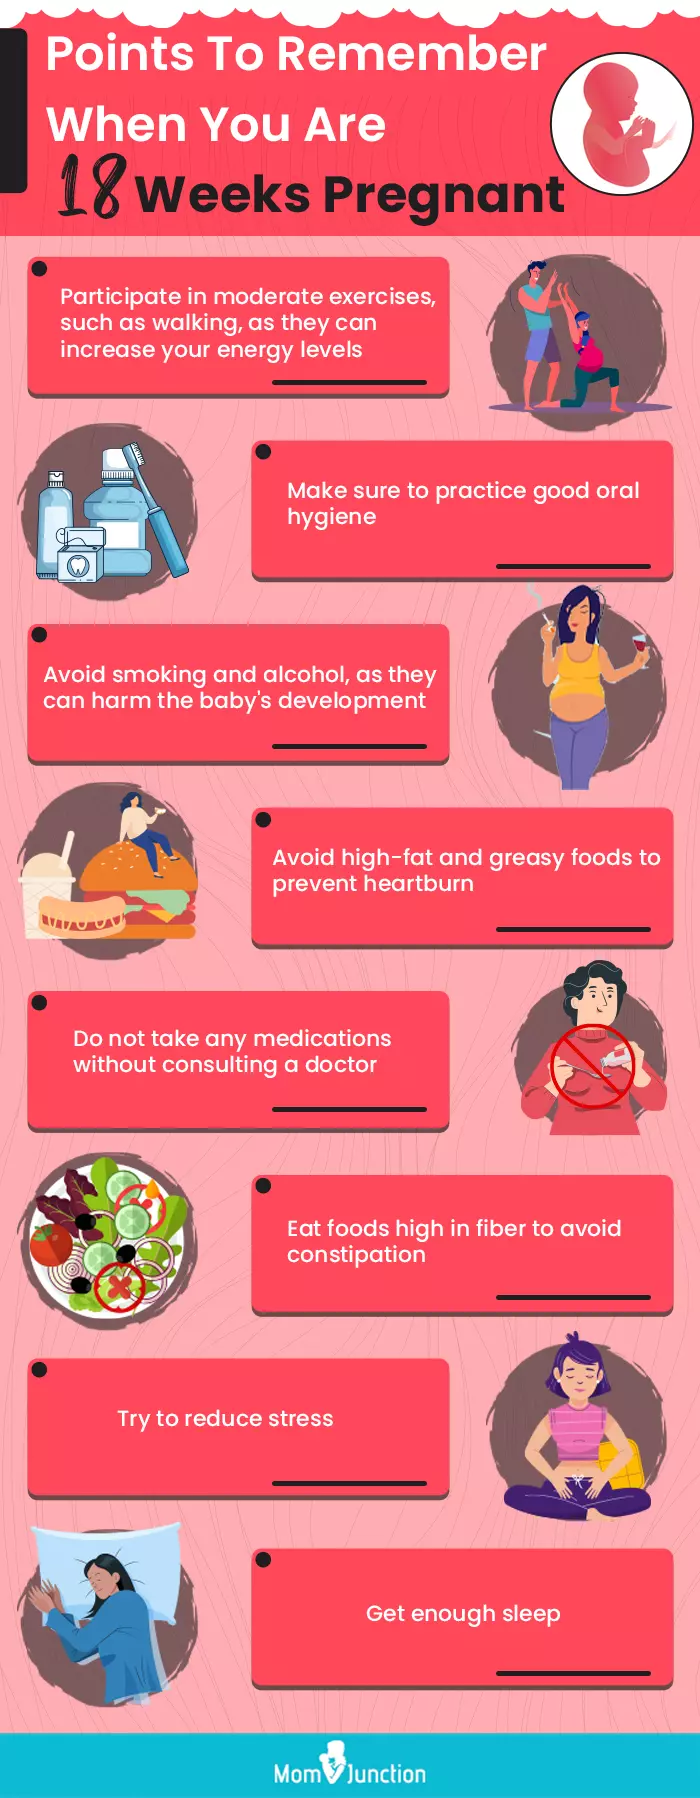 points to remember when you are 18 weeks pregnant (infographic)